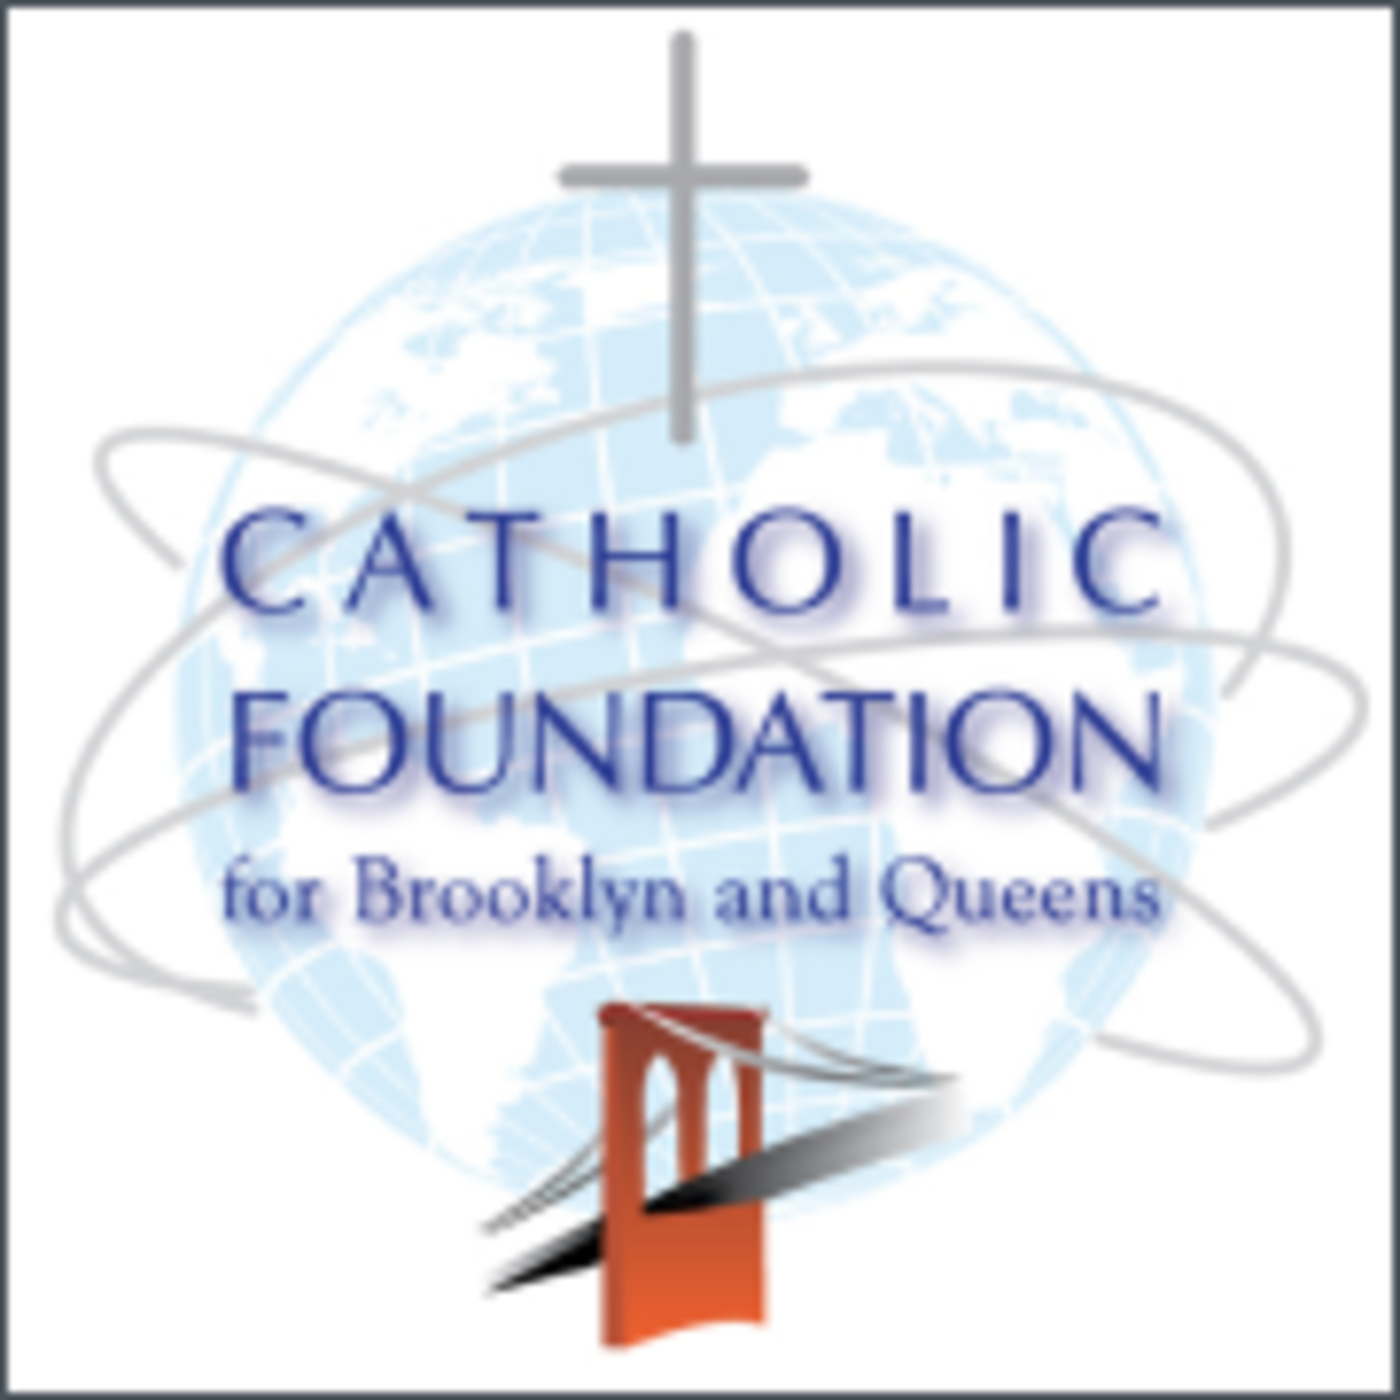 Catholic Foundation for Brooklyn and Queens